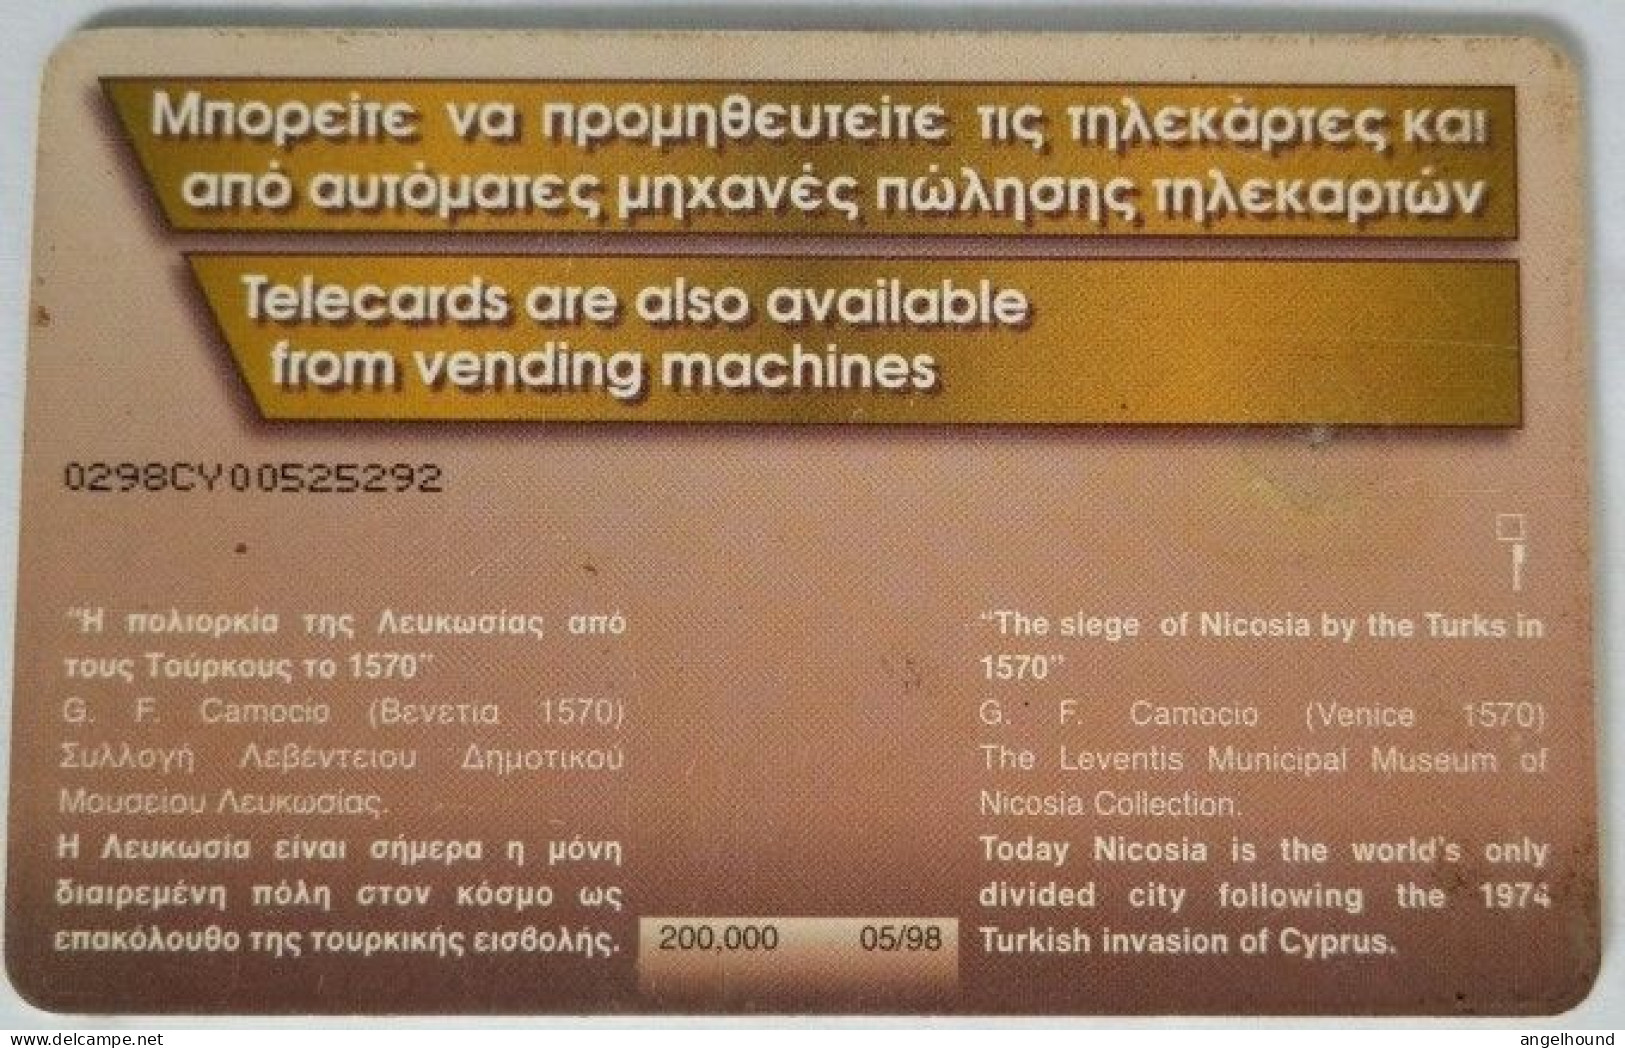 Cyprus  5 Pounds Chip Card - The Siege Of Nicosia By The Turks In 1570 - Hungary